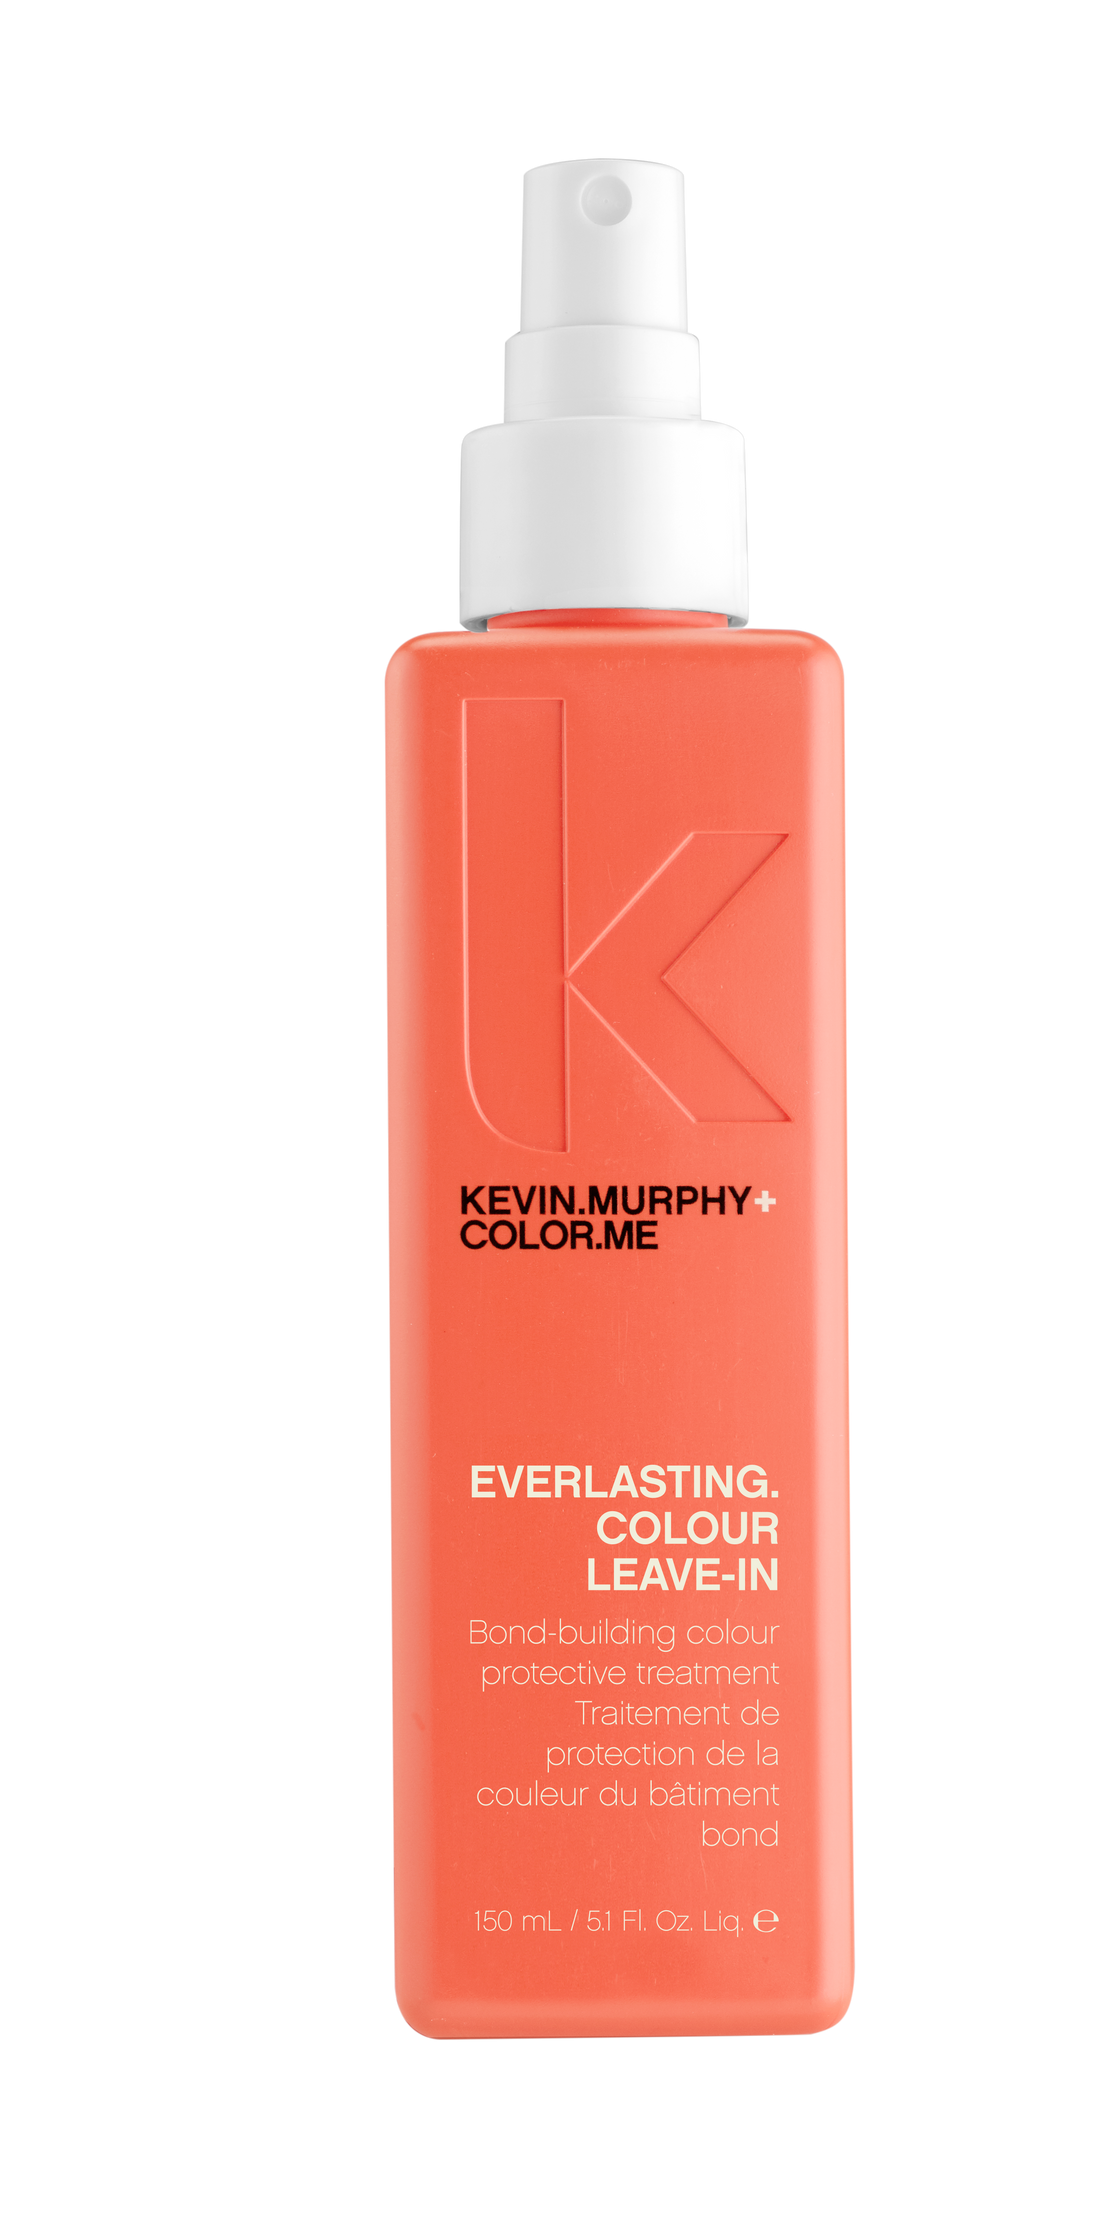 KEVIN MURPHY EVERLASTING COLOUR LEAVE-IN 150ml